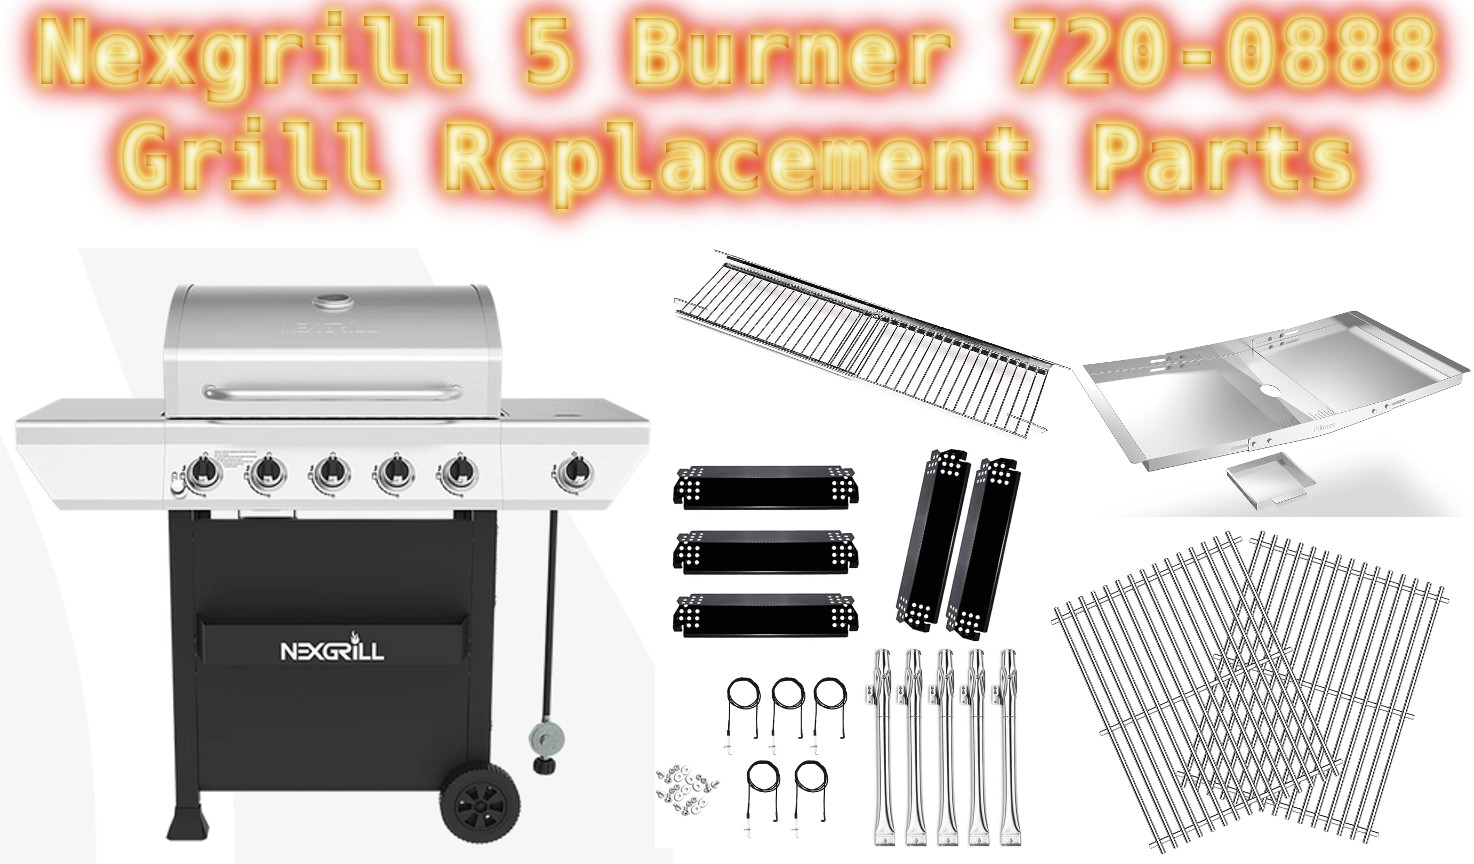 nexgrill 720-0888 replacement parts